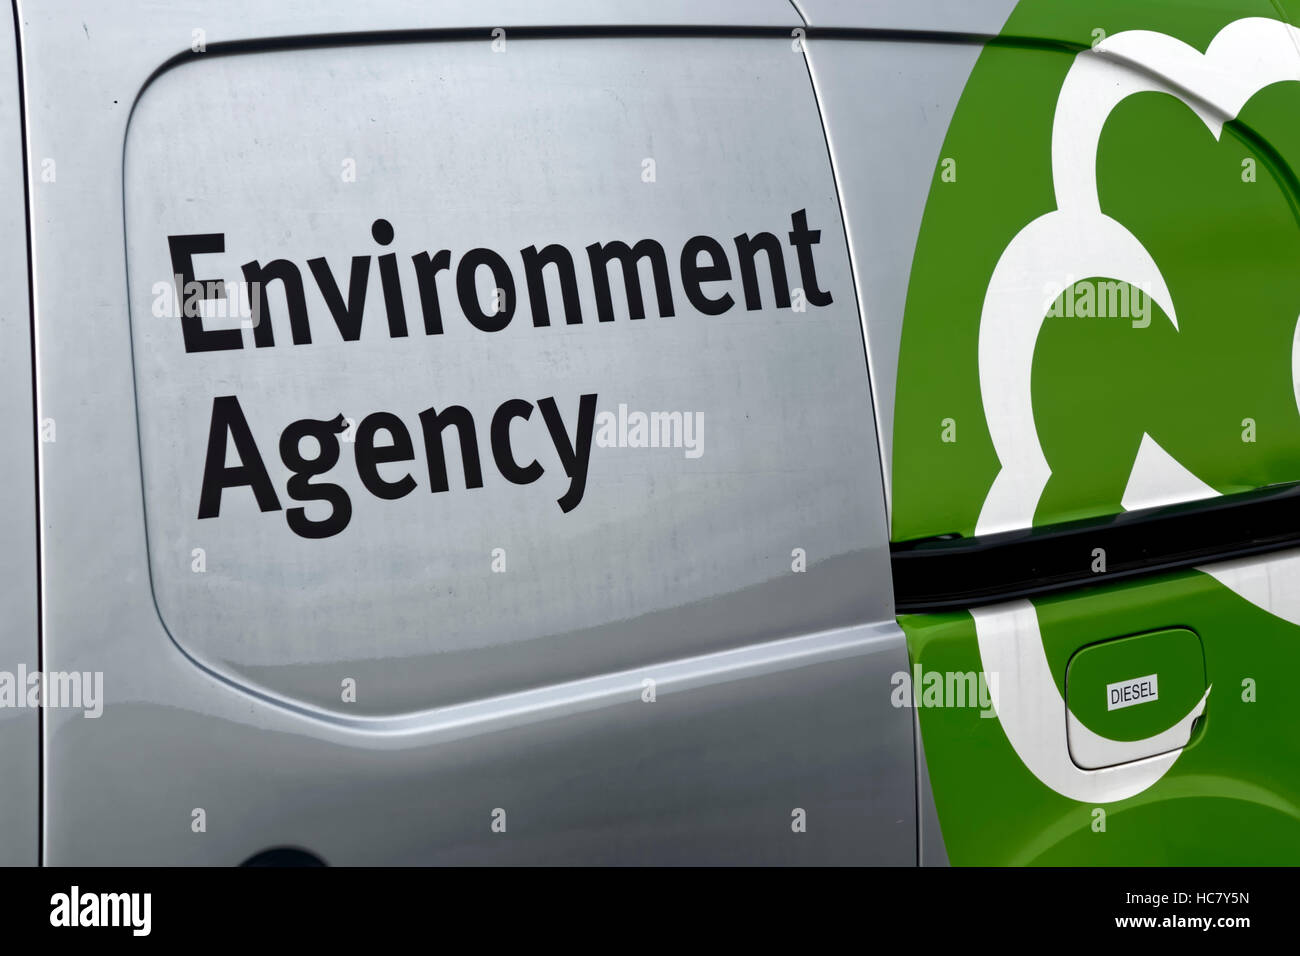 An Environment Agency Van in Wiltshire, United Kingdom. Stock Photo